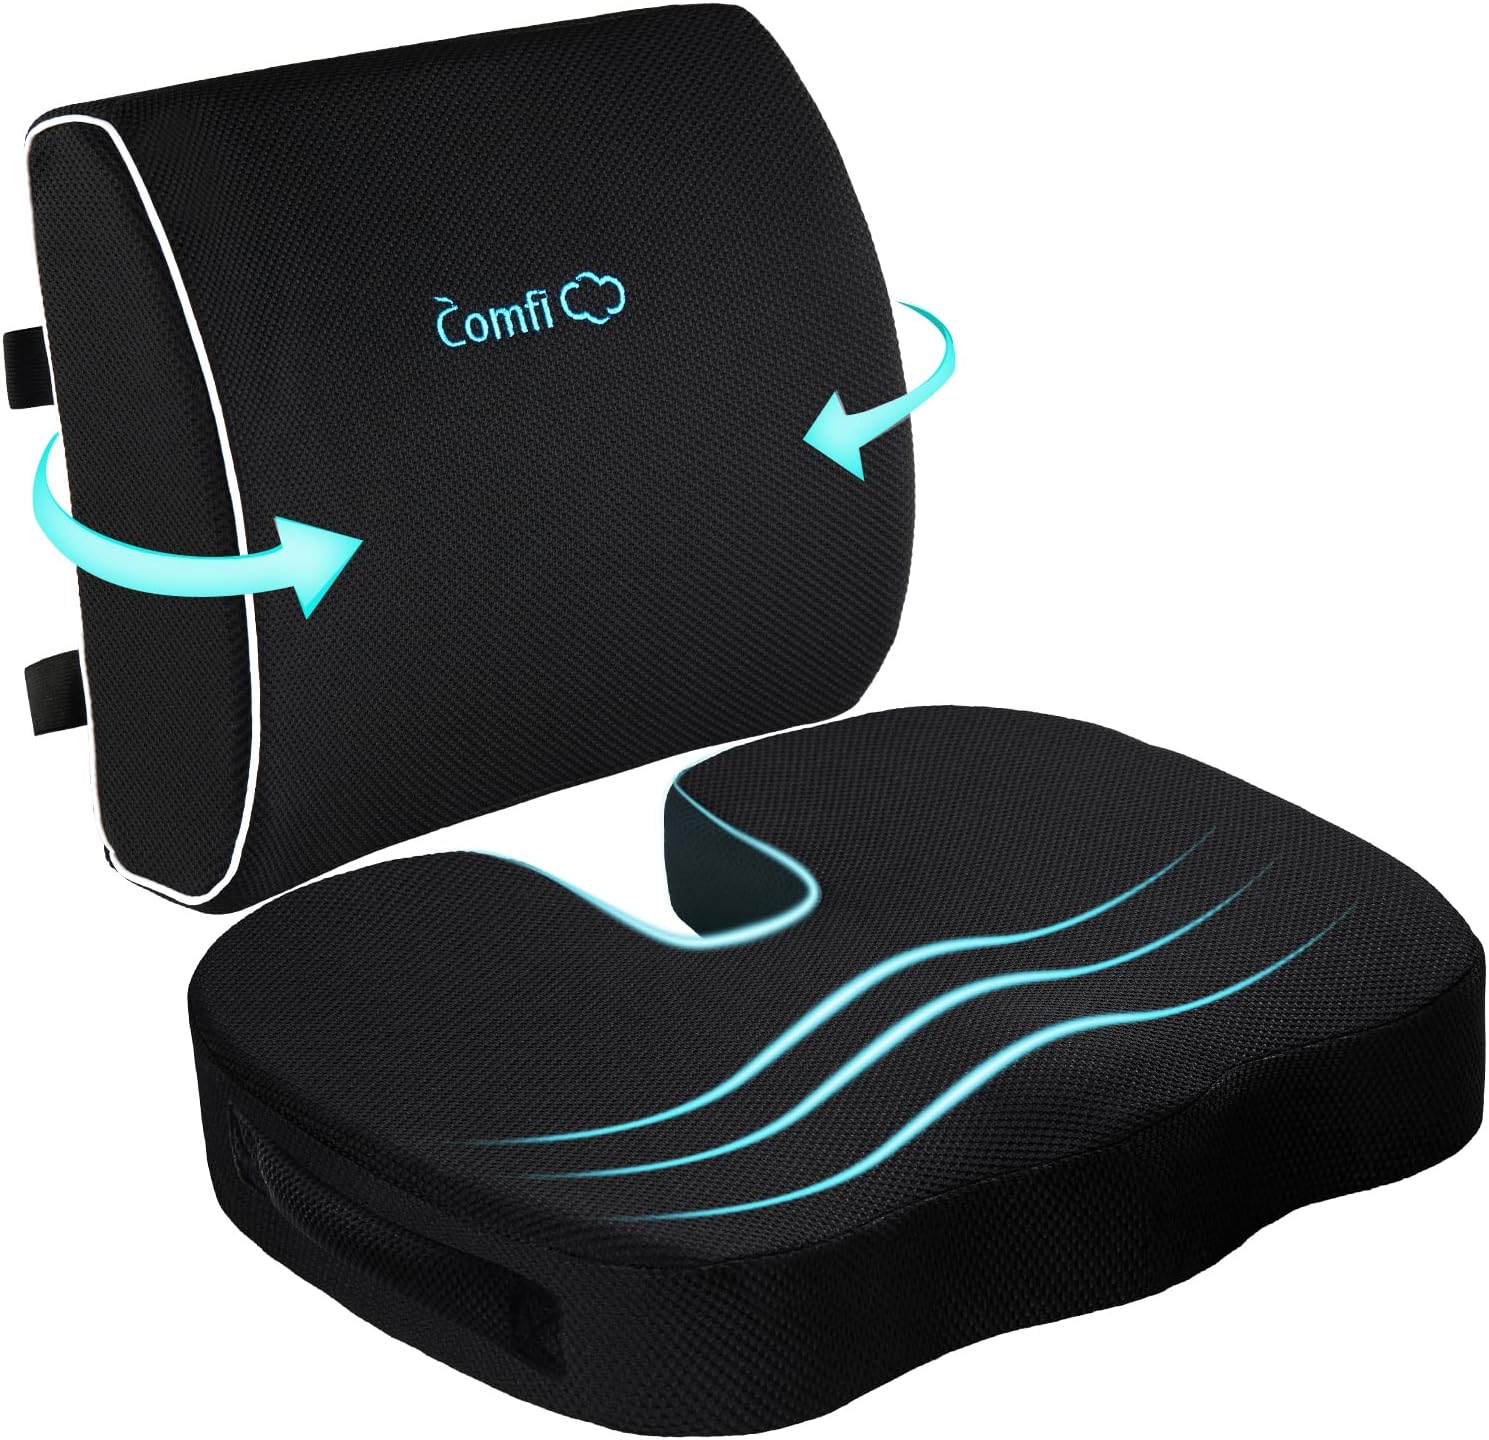 I like everything about this item. I am sitting on it right now..it relieves my back of pain it is sturdy